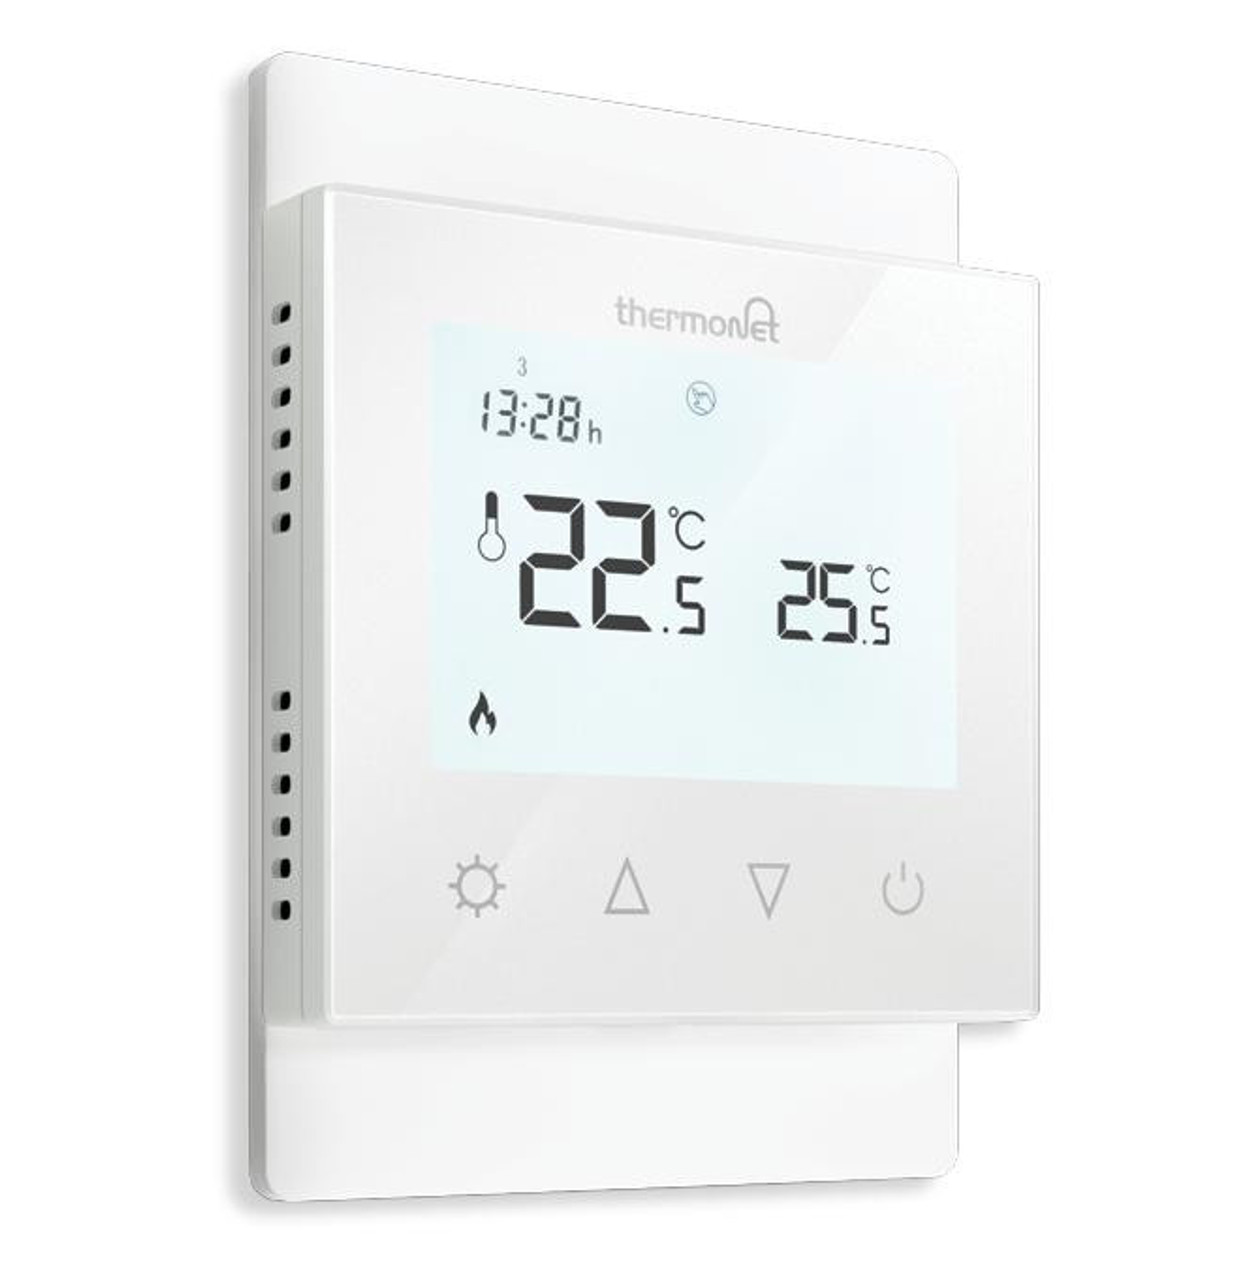 Thermonet EZ 150W/m² Underfloor Heating Kit 115016T with Programmable Thermostat 5220A 8m²